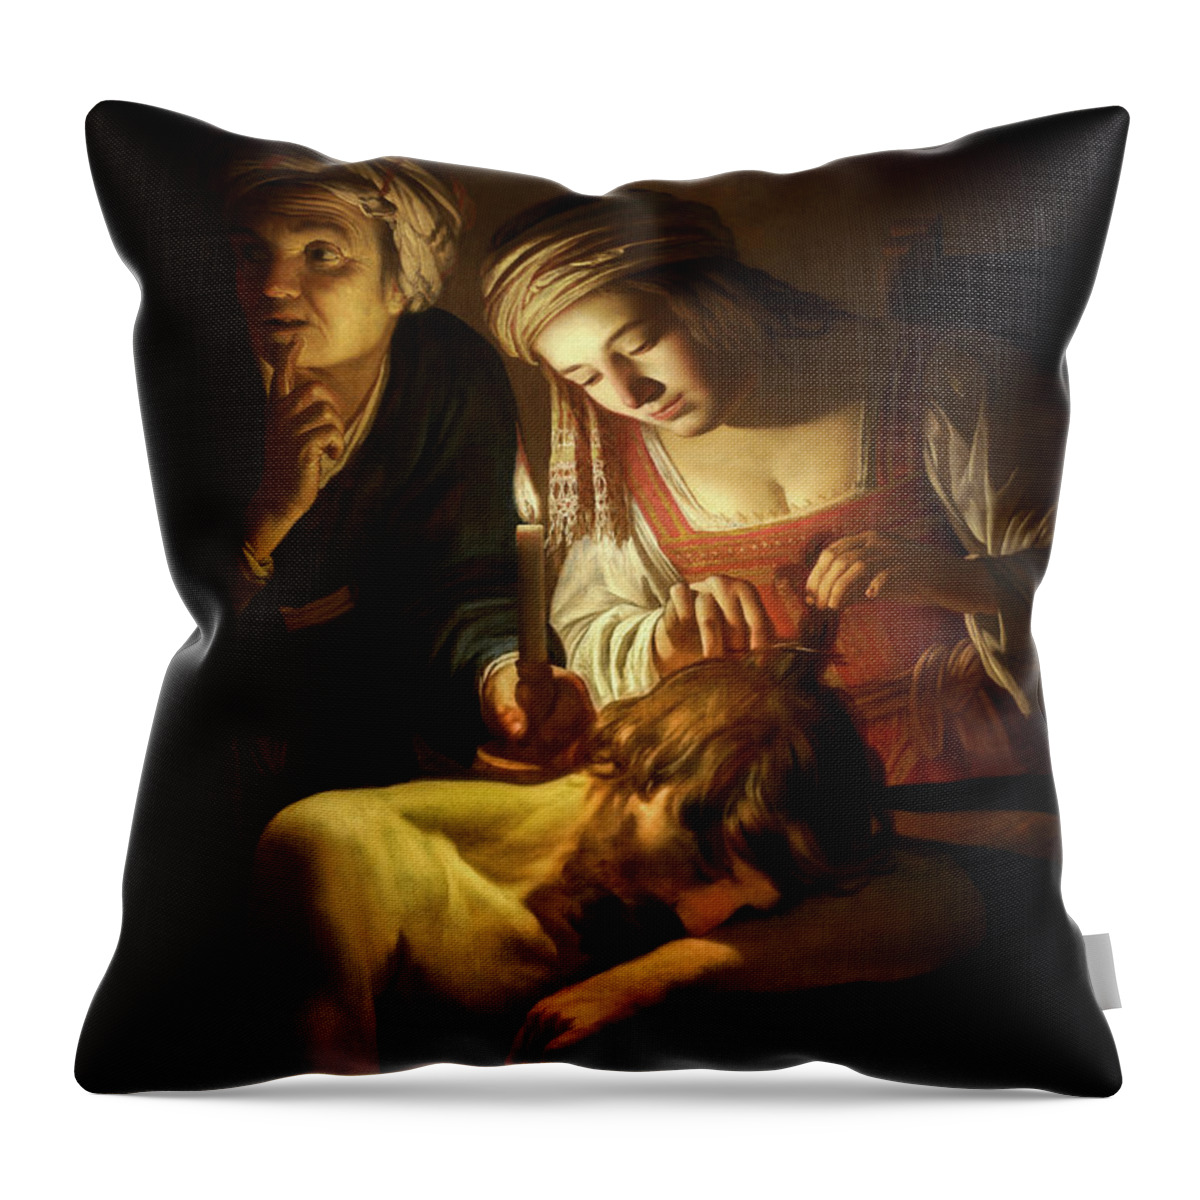 Samson And Delilah Throw Pillow featuring the photograph Samson and Delilah by Gerrit van Honthorst by Carlos Diaz